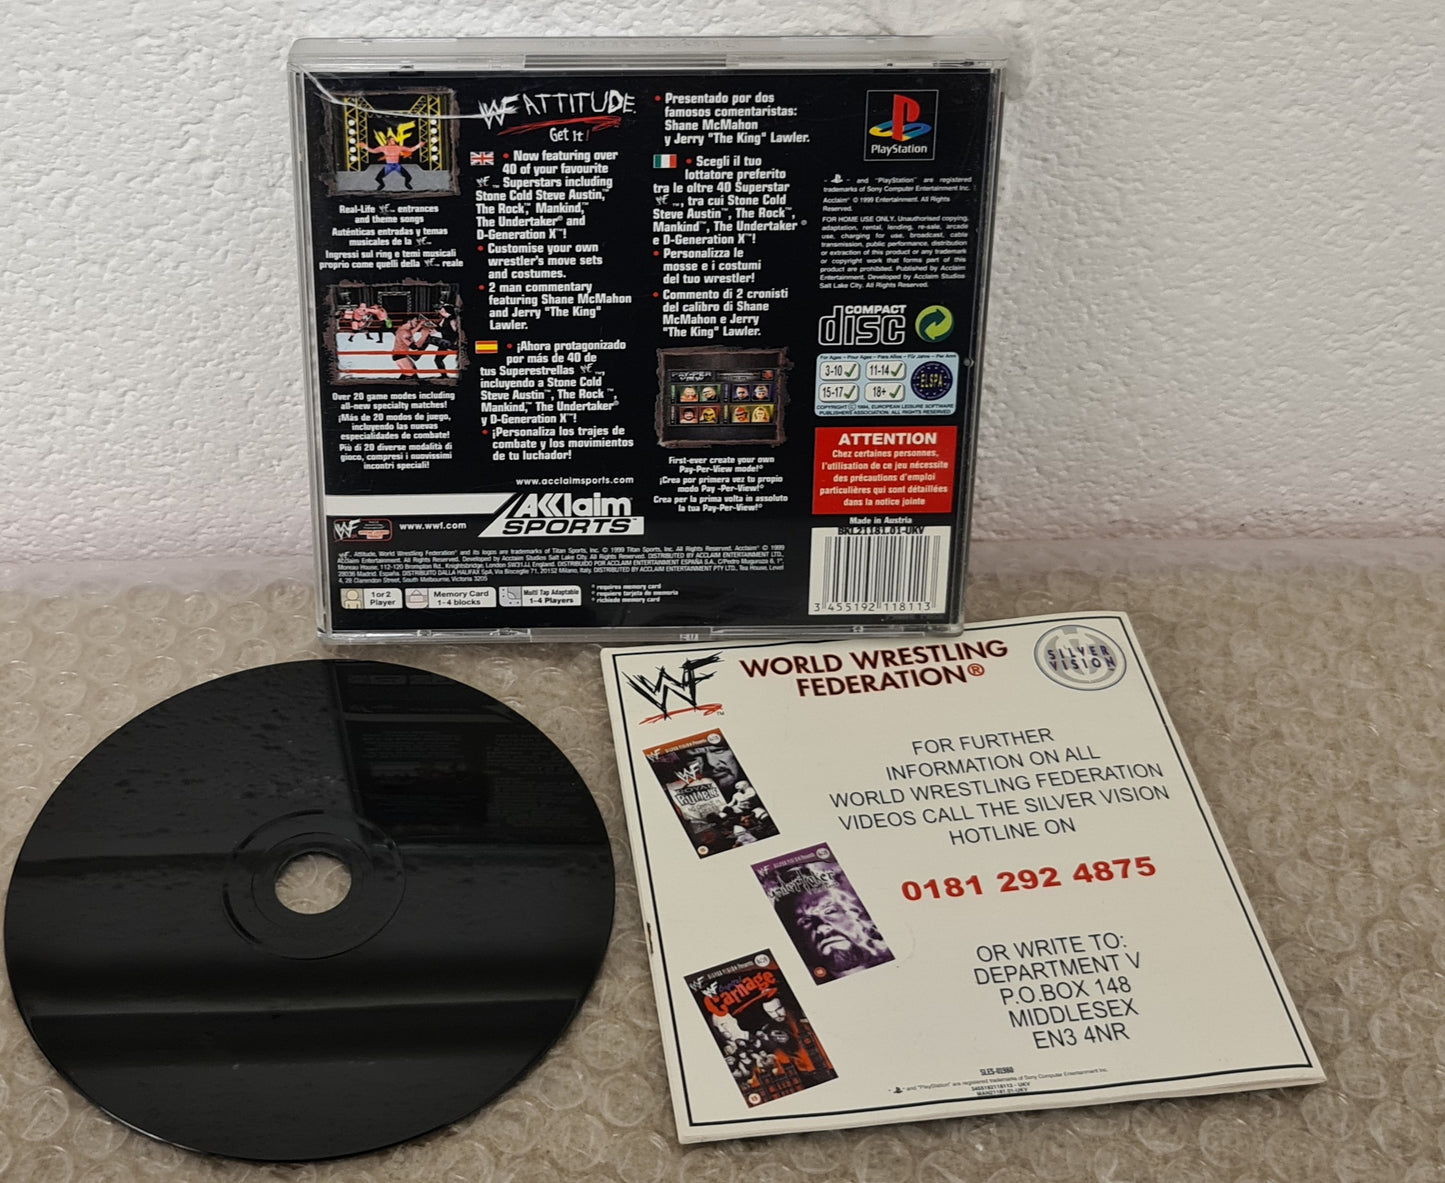 WWF Attitude Sony Playstation 1 (PS1) Game